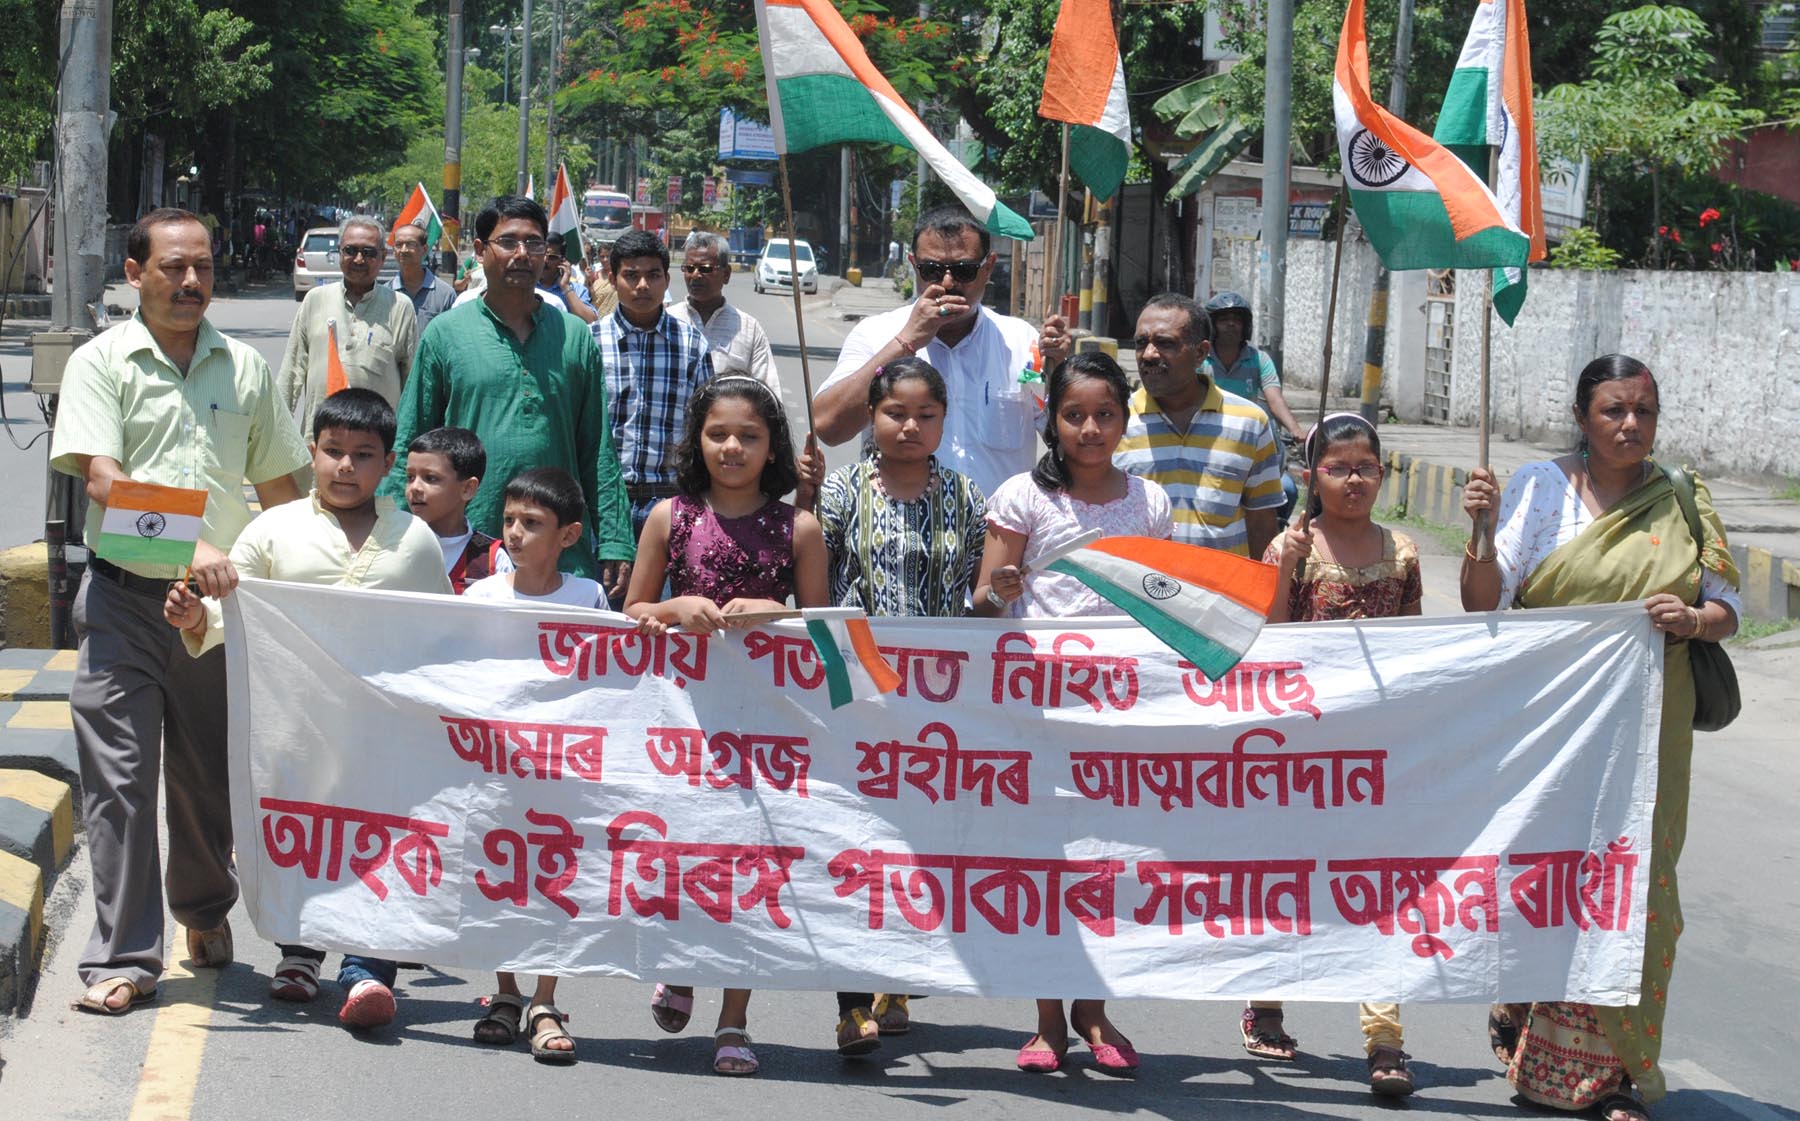 Scribes and citizens take out rally in Guwahati on I-day.